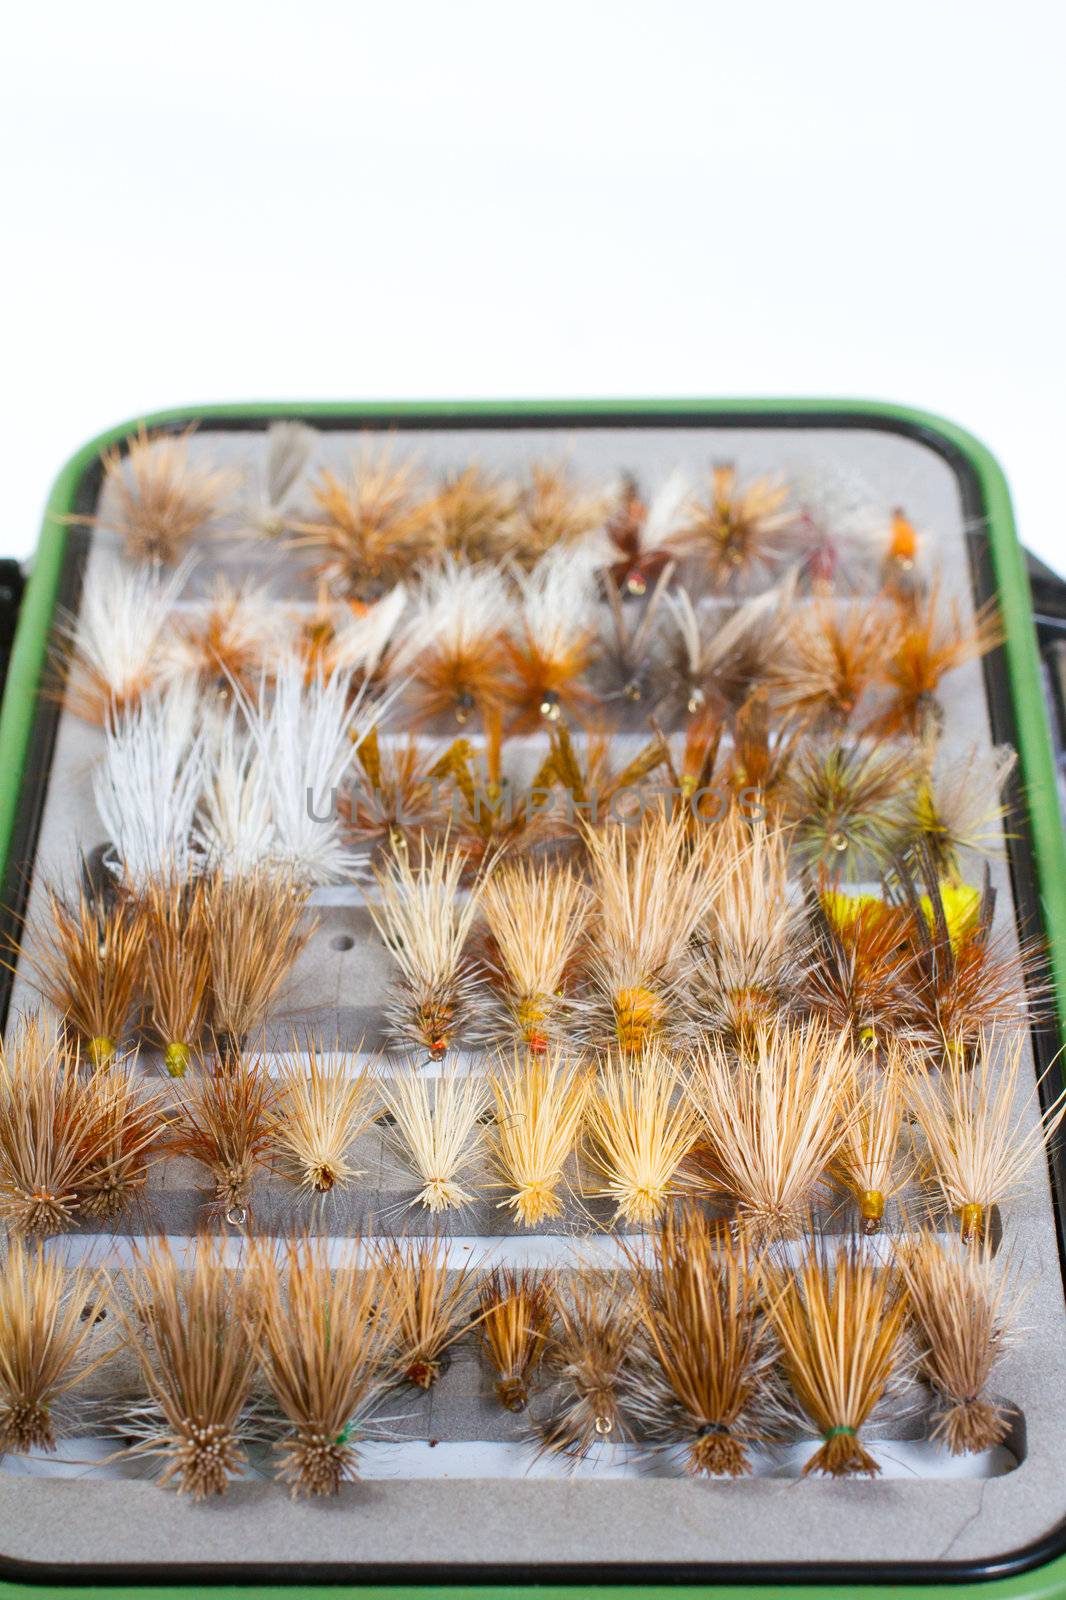 A fly fishing box of flies contains dry flies including caddis, bwo, adams, stone, and more in this abstract color image detail for the recreational pursuit.